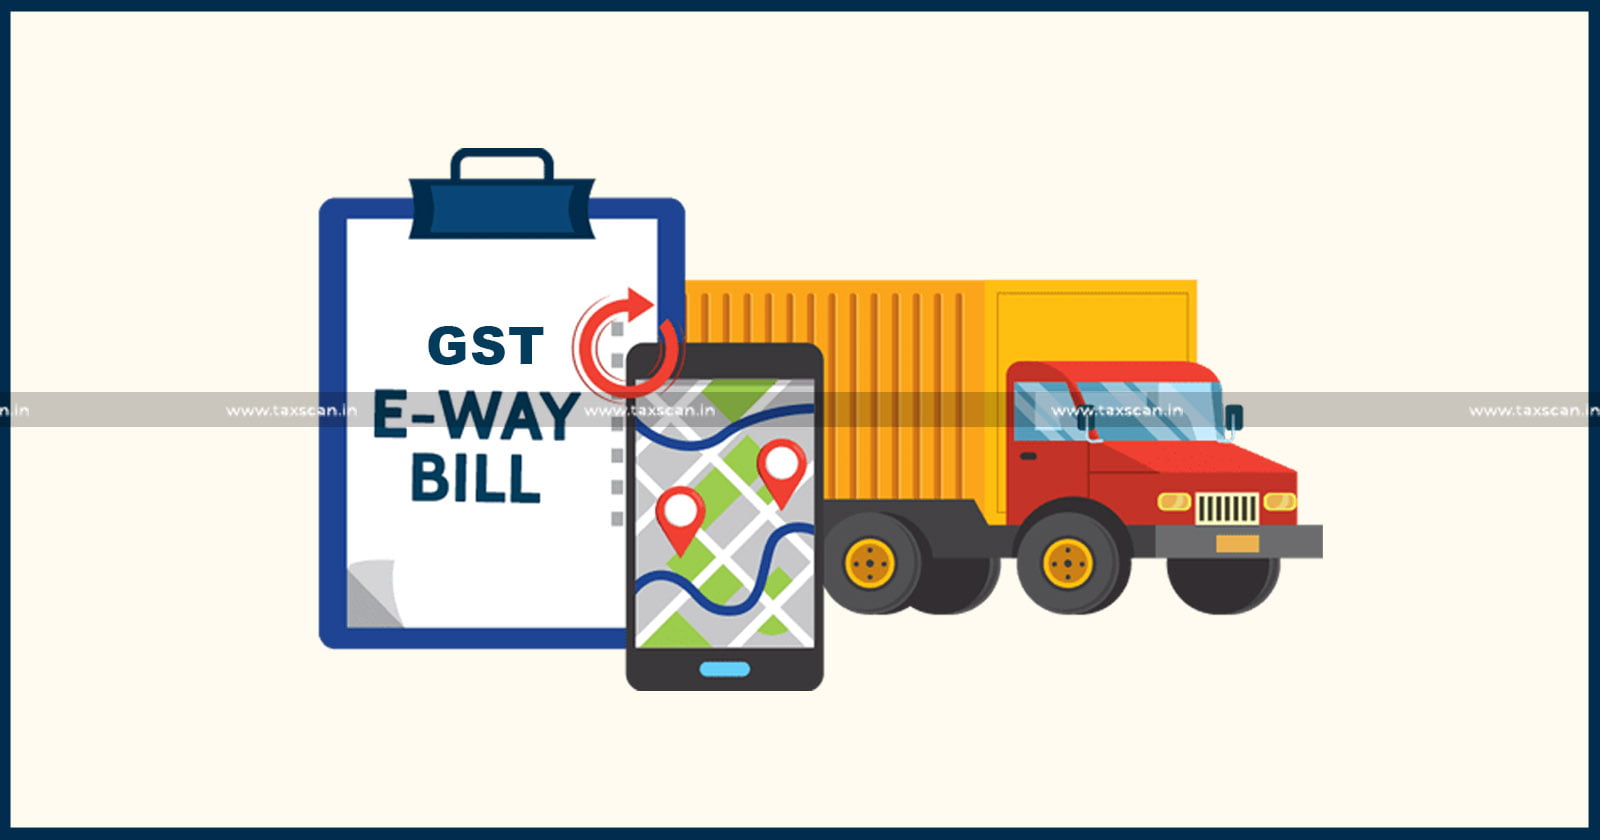 Penalty - Vehicle Number Discrepancy - Consignment Note -Vehicle Breakdown - GST e-waybill - Updated - Allahabad HC - TAXSCAN